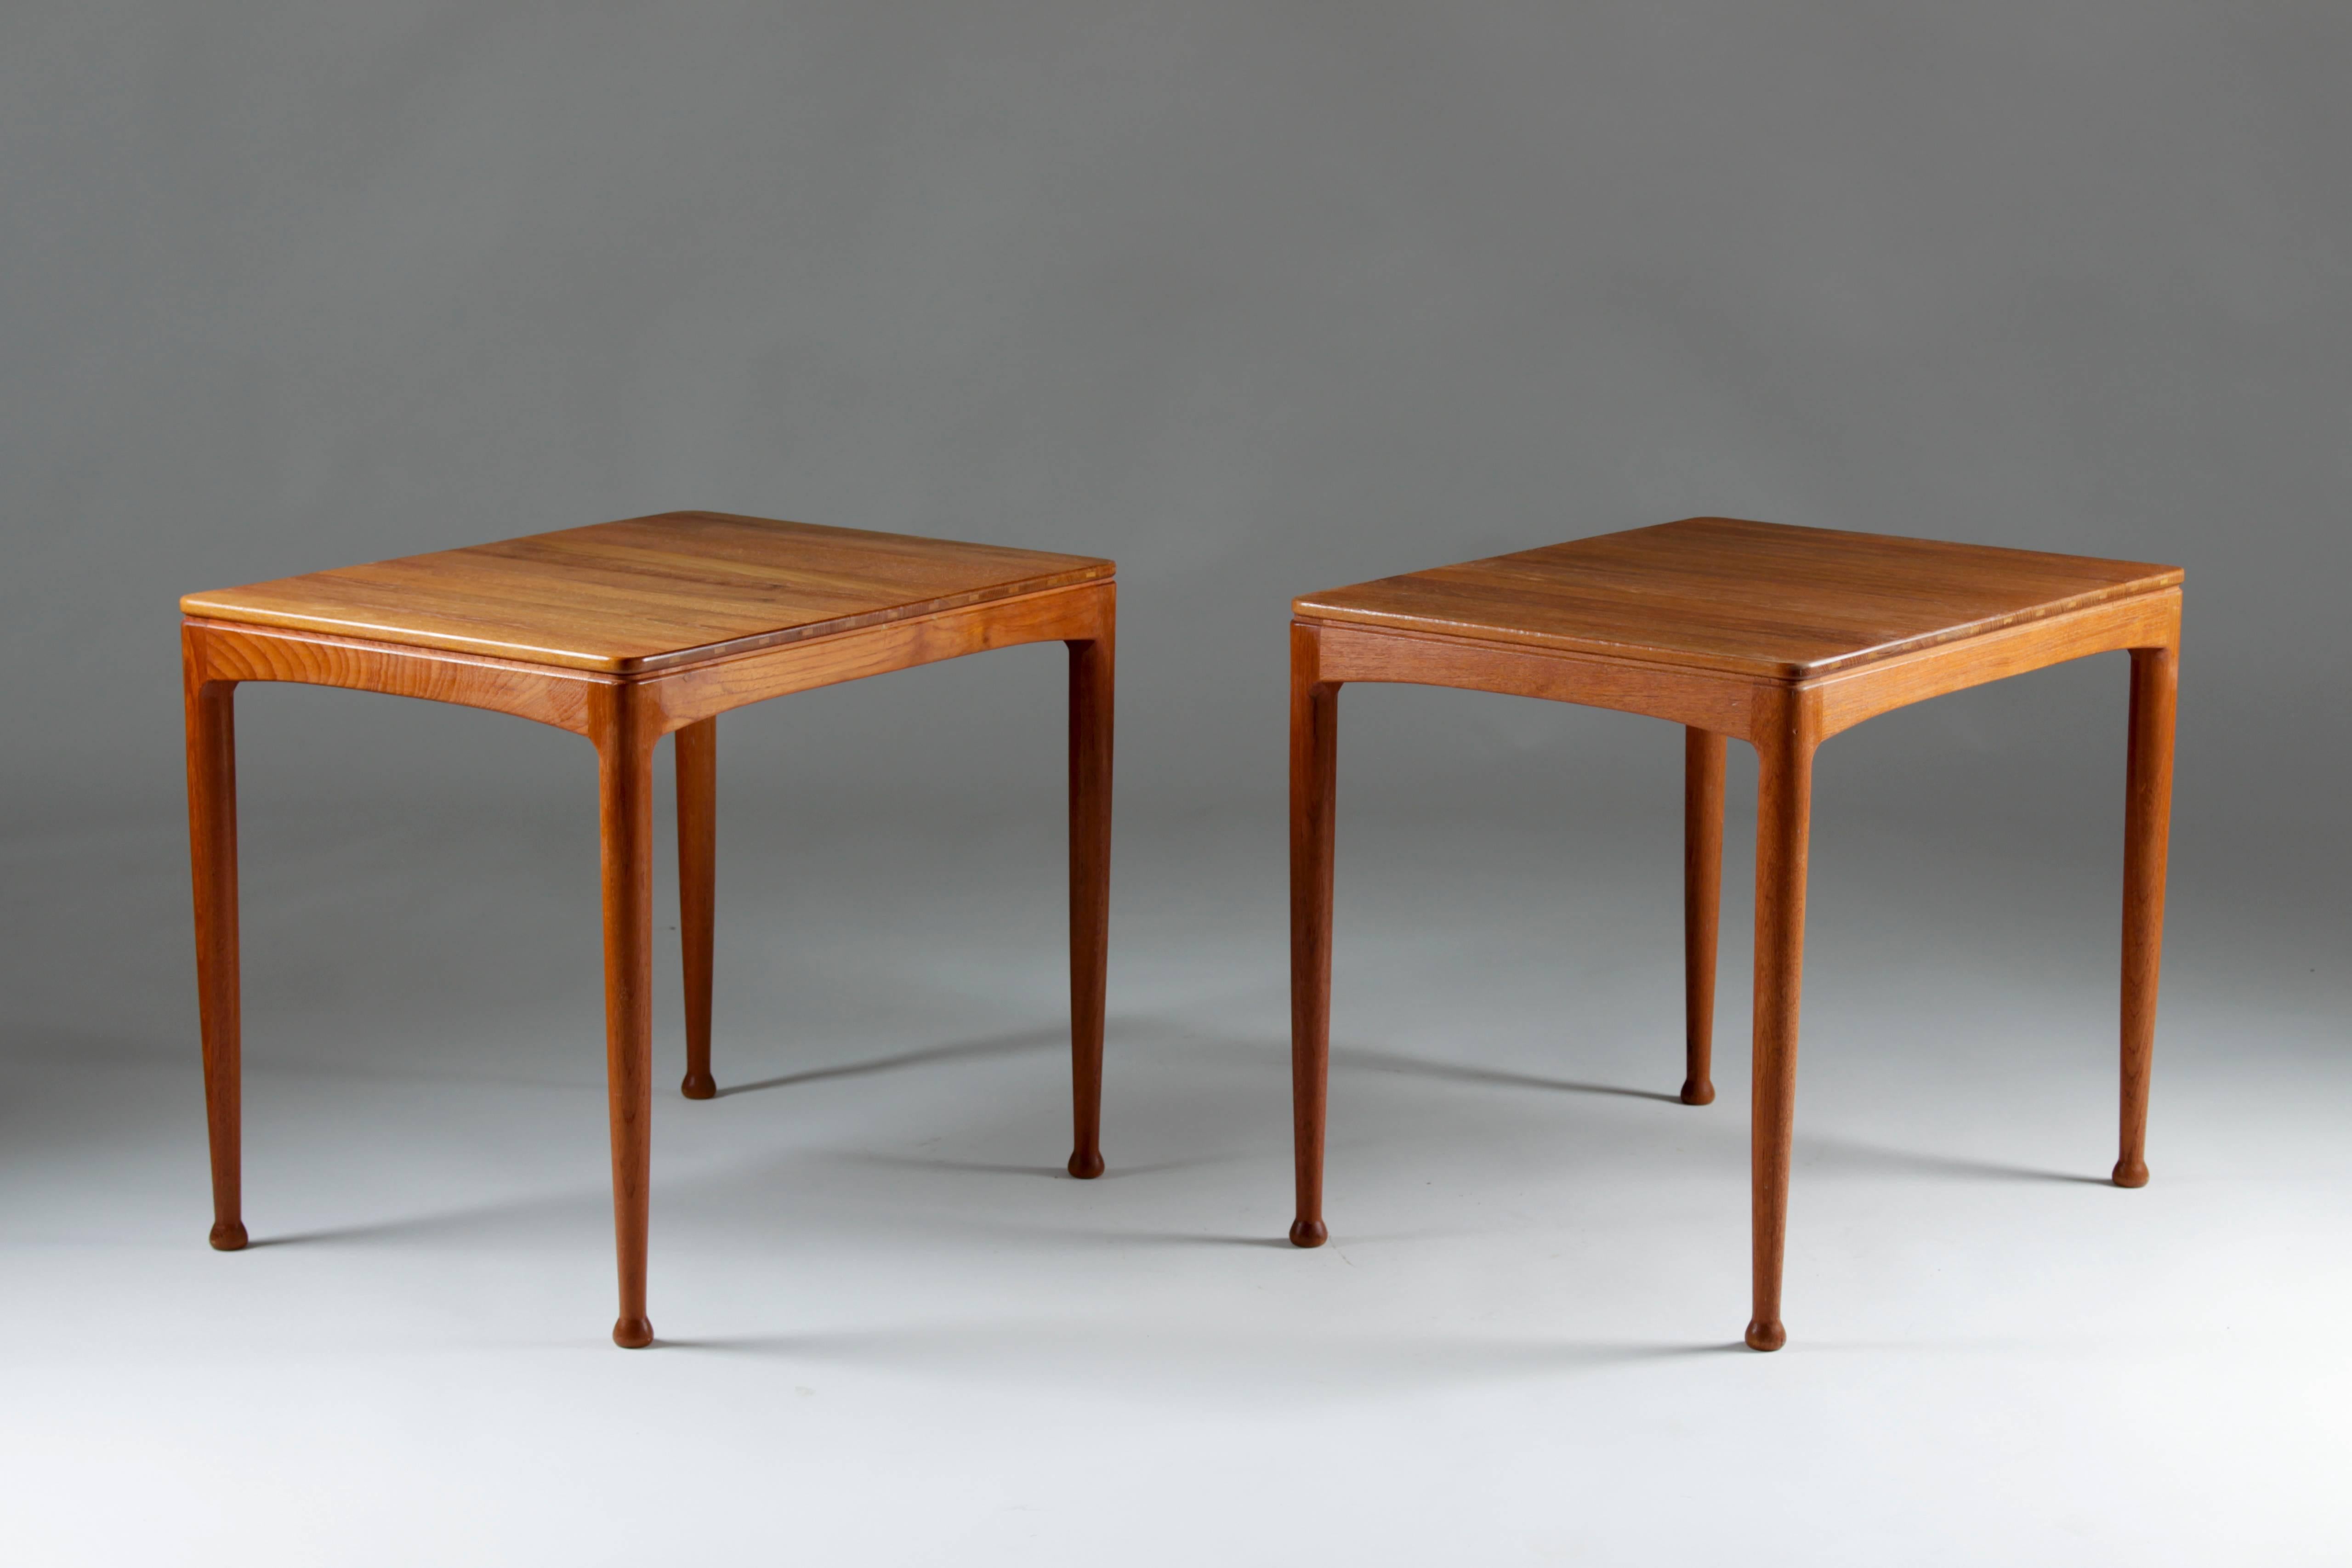 A pair of side tables in solid teak and drumstick legs. The table top is held together with pieces of light wood that become visible on the side.
The tables are in excellent restored condition.
Free shipping in Europe and low rates to other